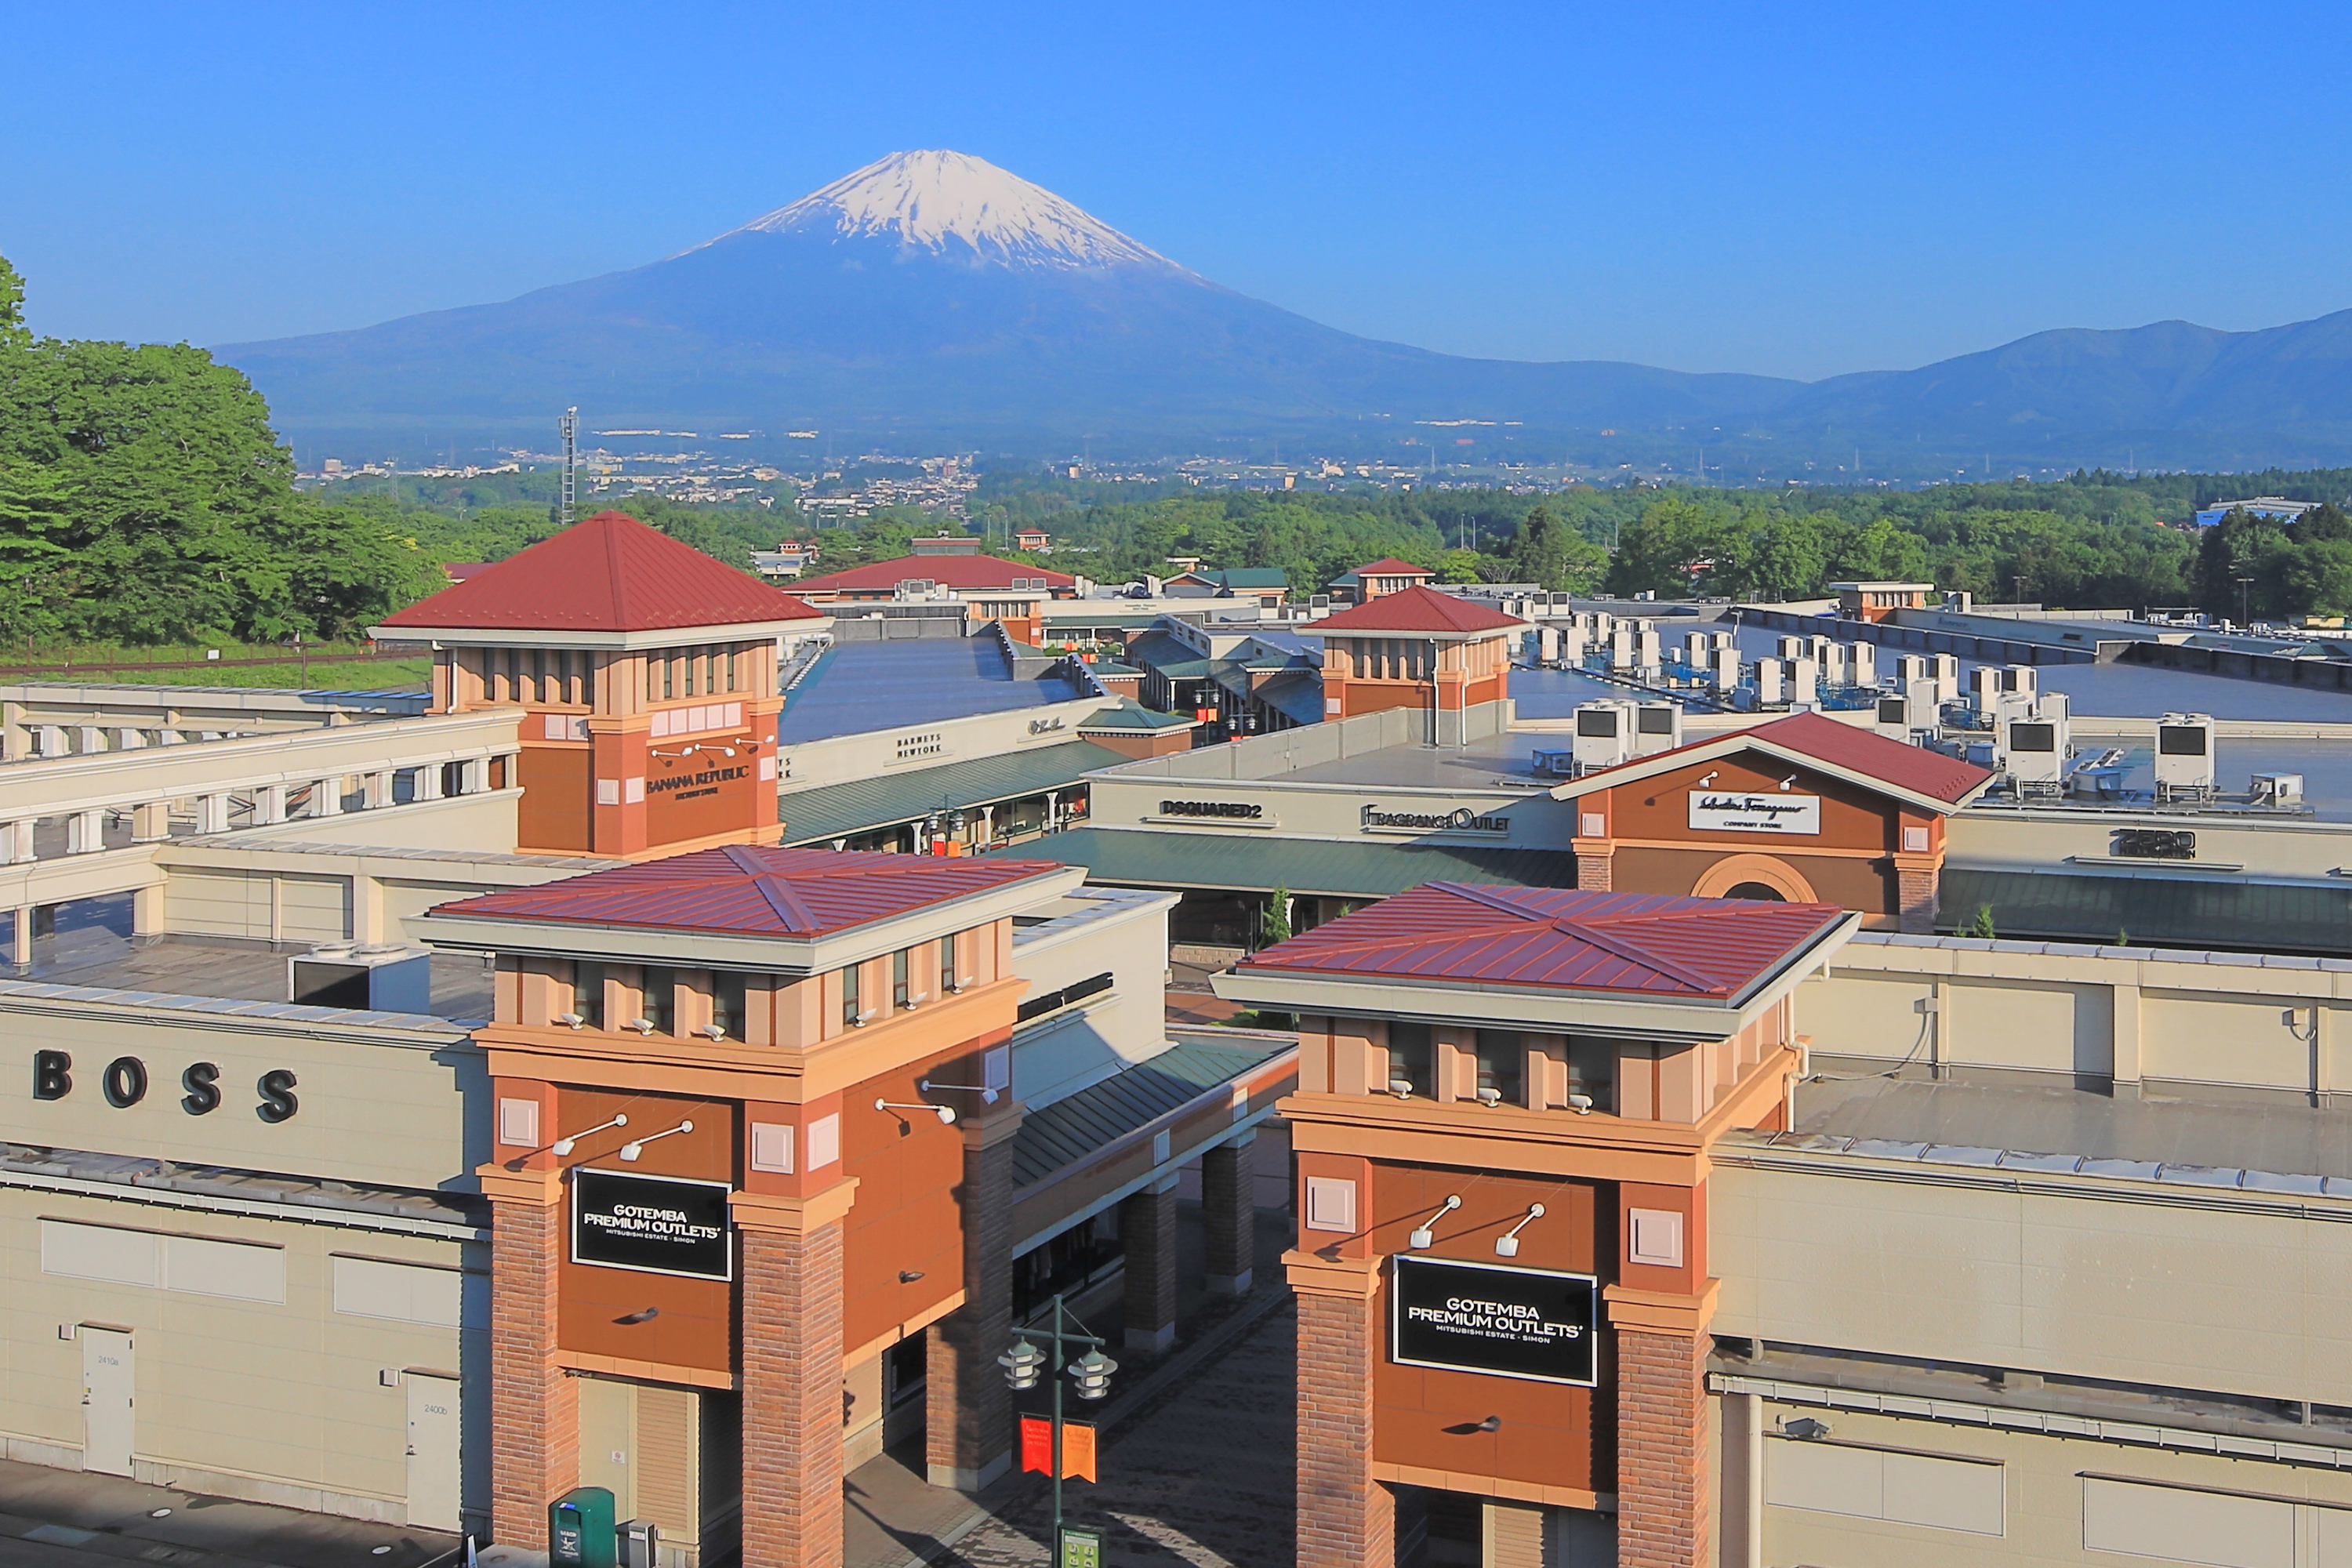 Gotemba Premium Outlets - Where to Shop, Access, Hours & Price